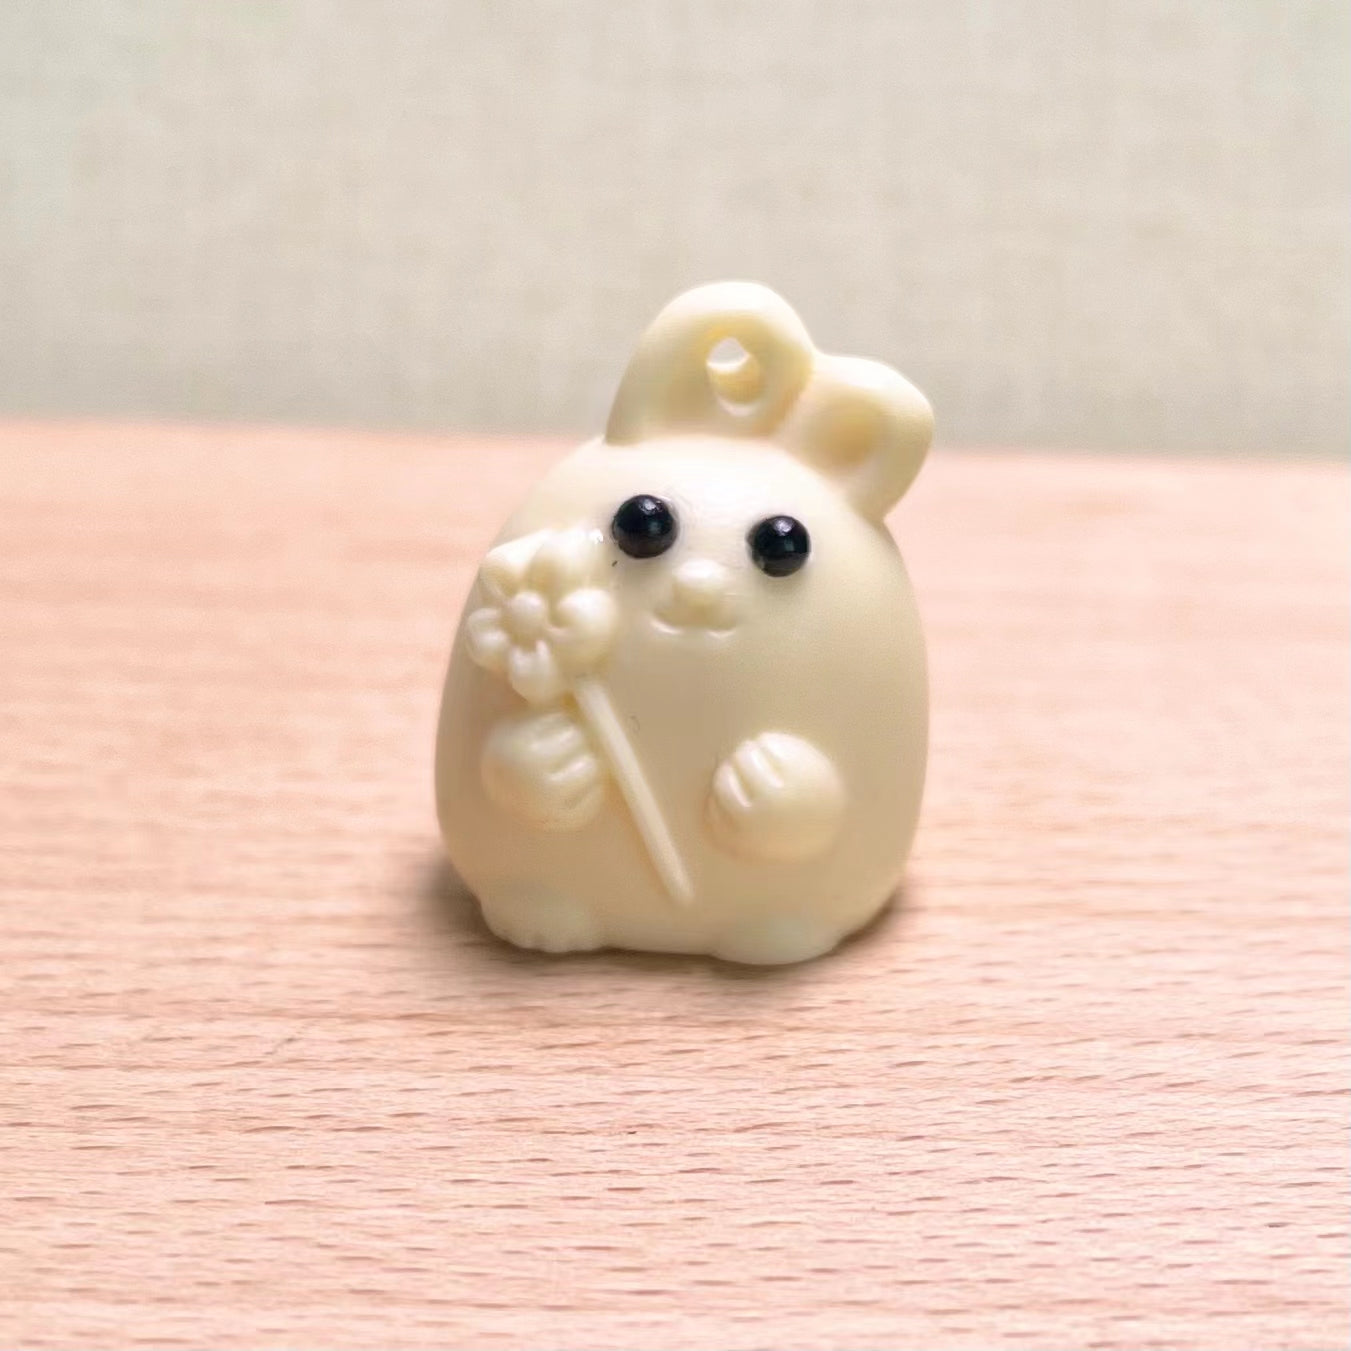 Ivory nut Bunny carving accessories